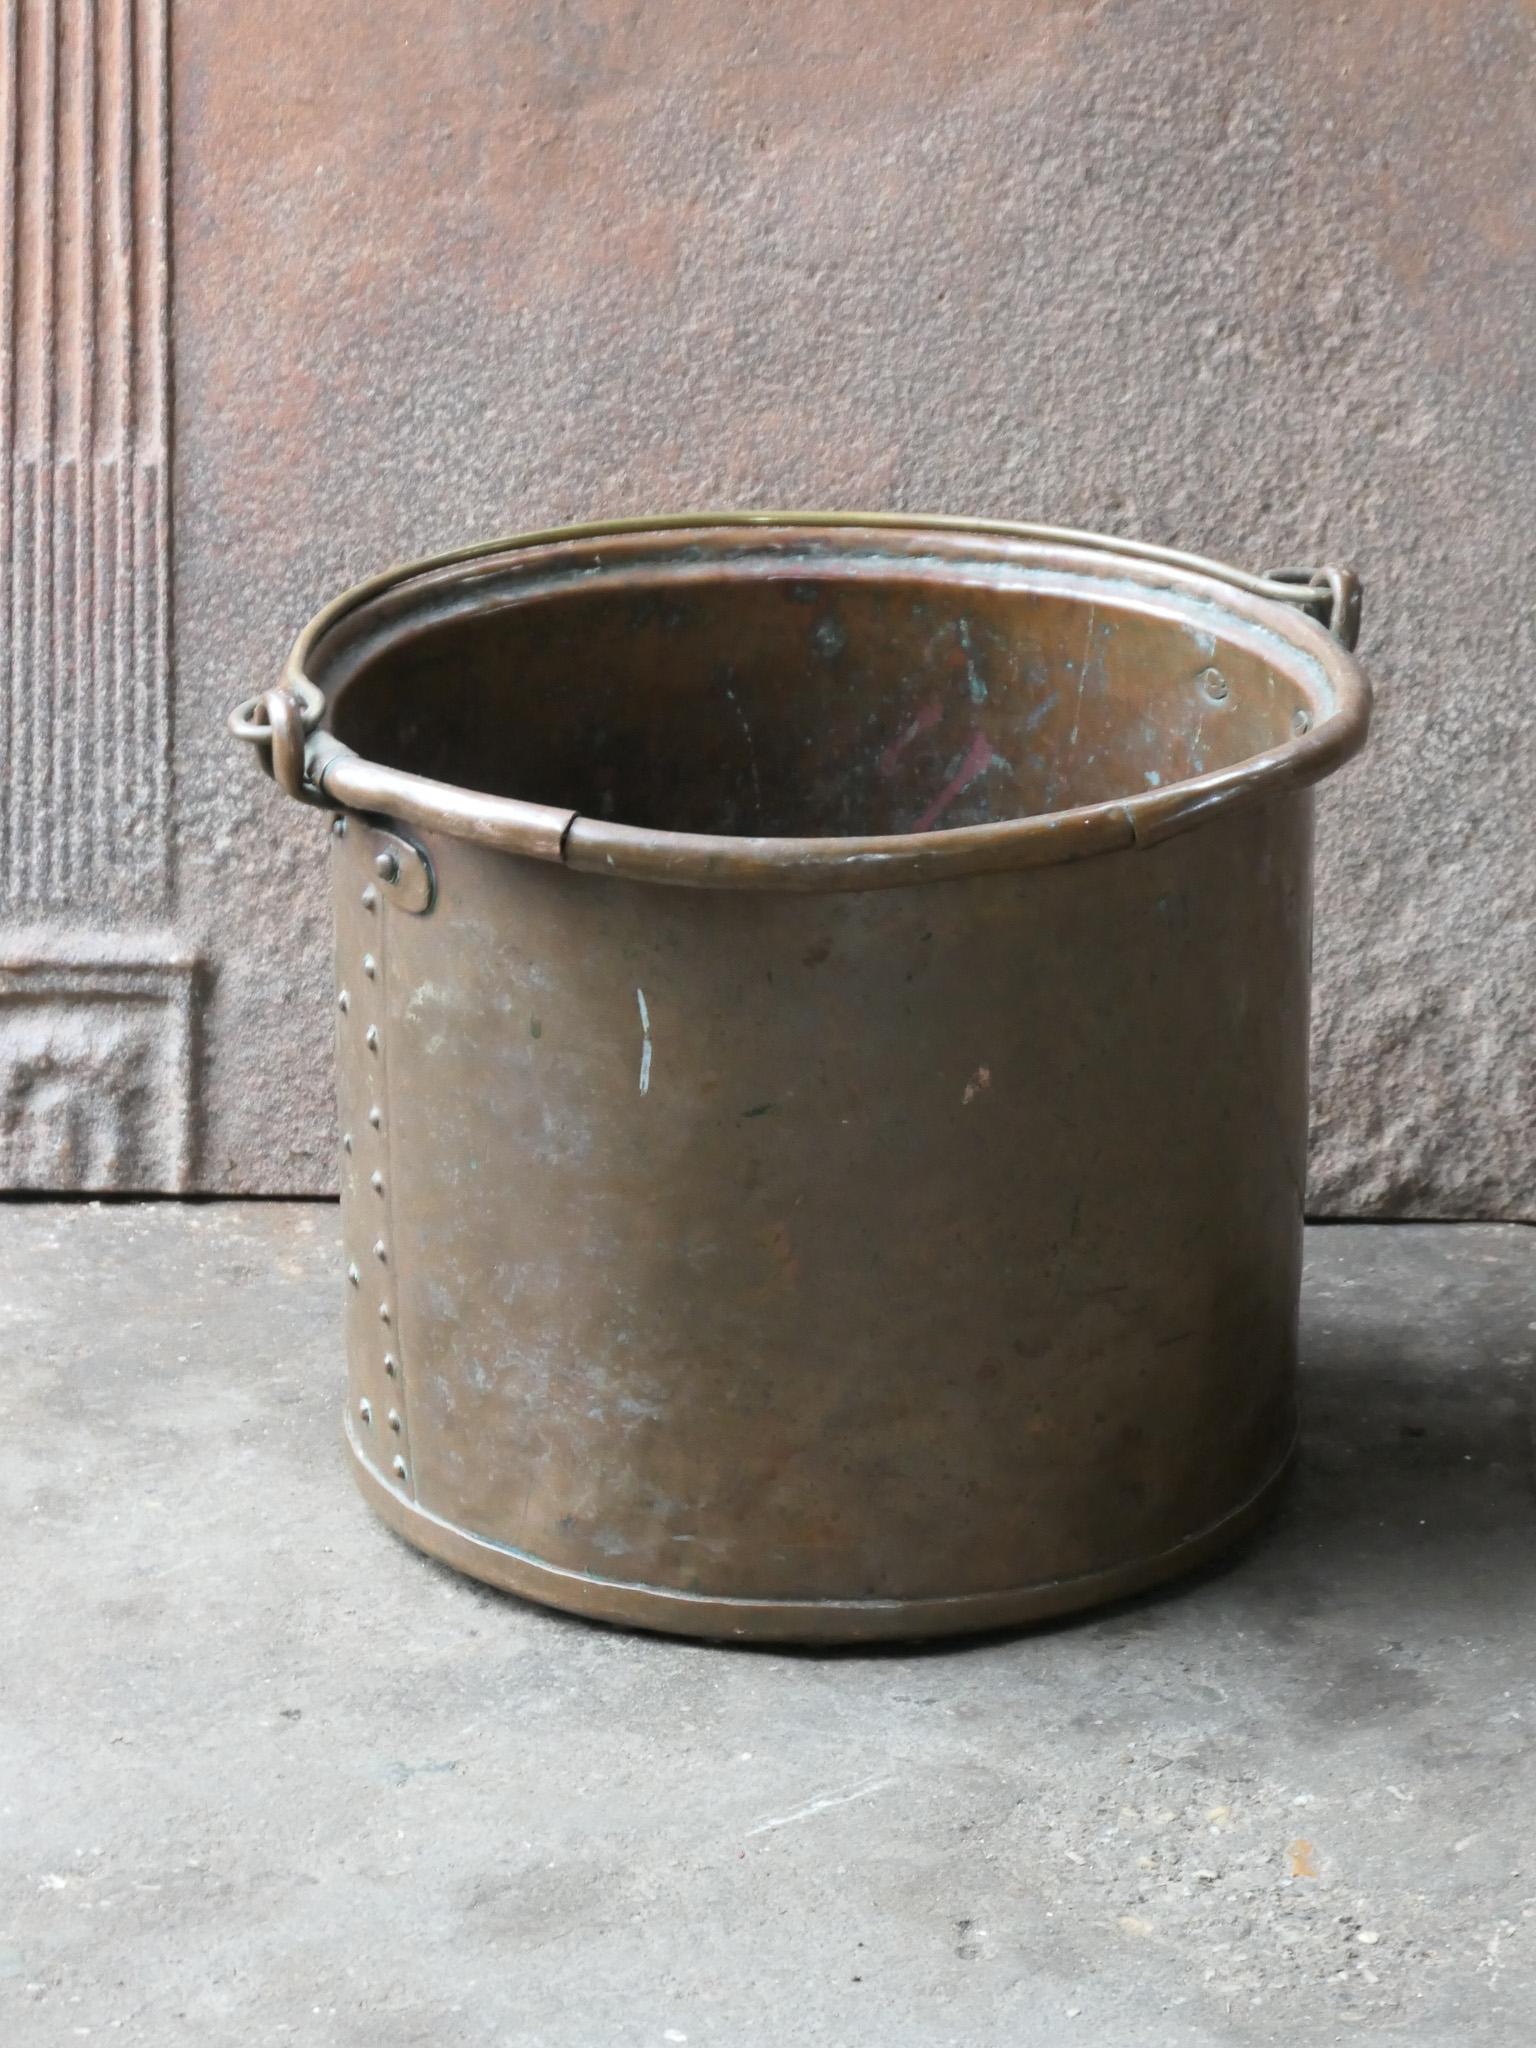 19th century Dutch Napoleon III firewood basket holder. The log holder is made copper. Also called 'Frisian nail bucket'. Was used for the transport of milk.

The log holder is in a good condition and is fully functional.